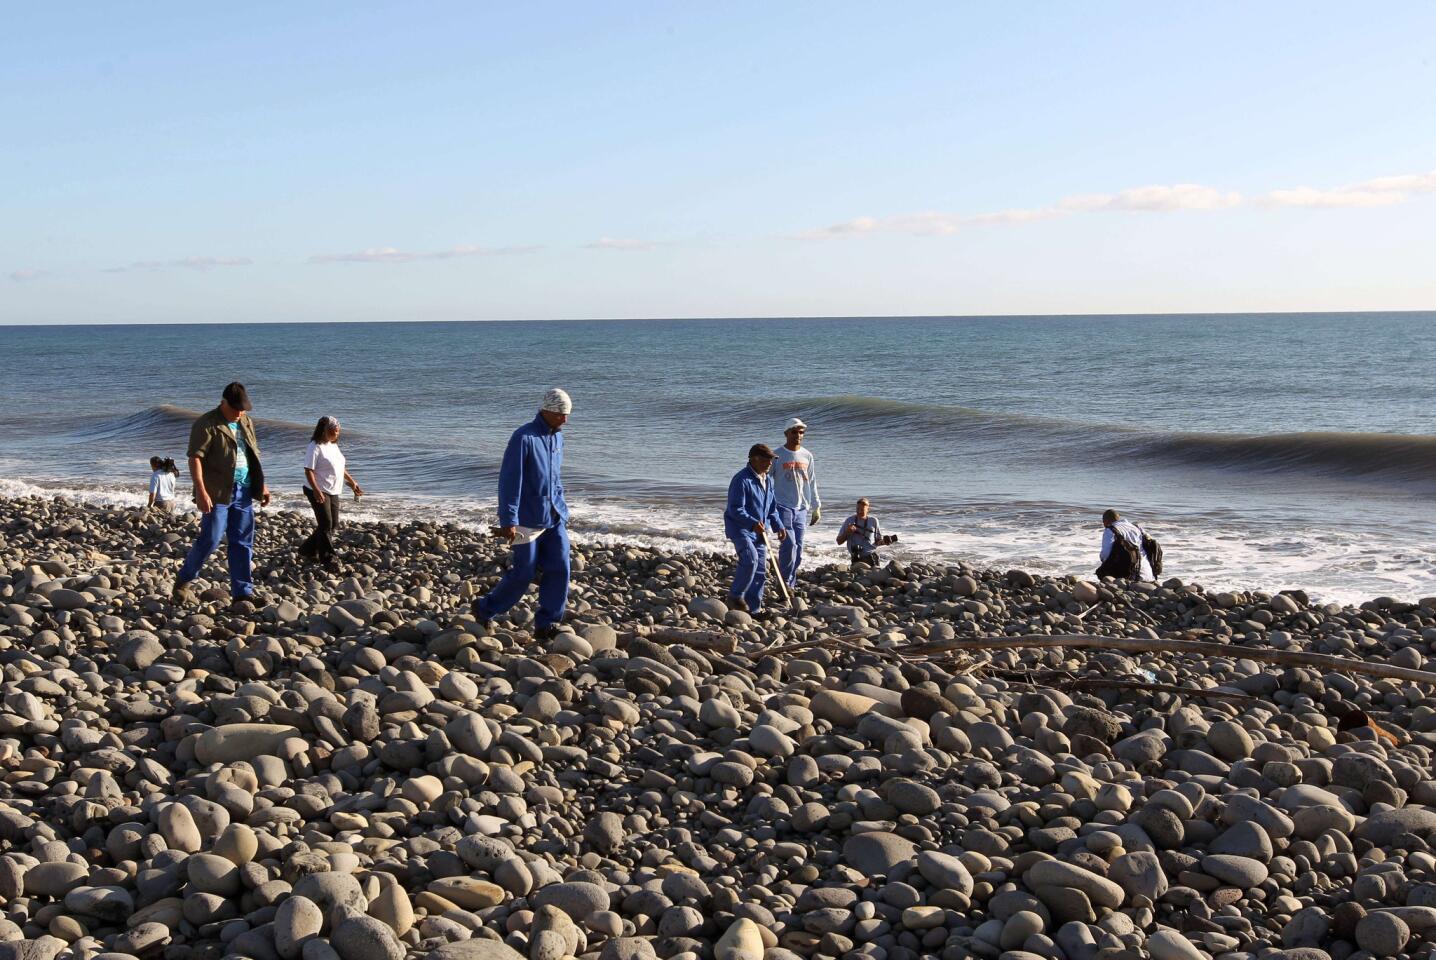 Volunteers of the "3 E" (Eastern Environnement and Economy) association — usually in charge of costal cleaning — search for more potential plane debris and items on the shore in Saint-Andre, Reunion Island, on July 31, 2015.